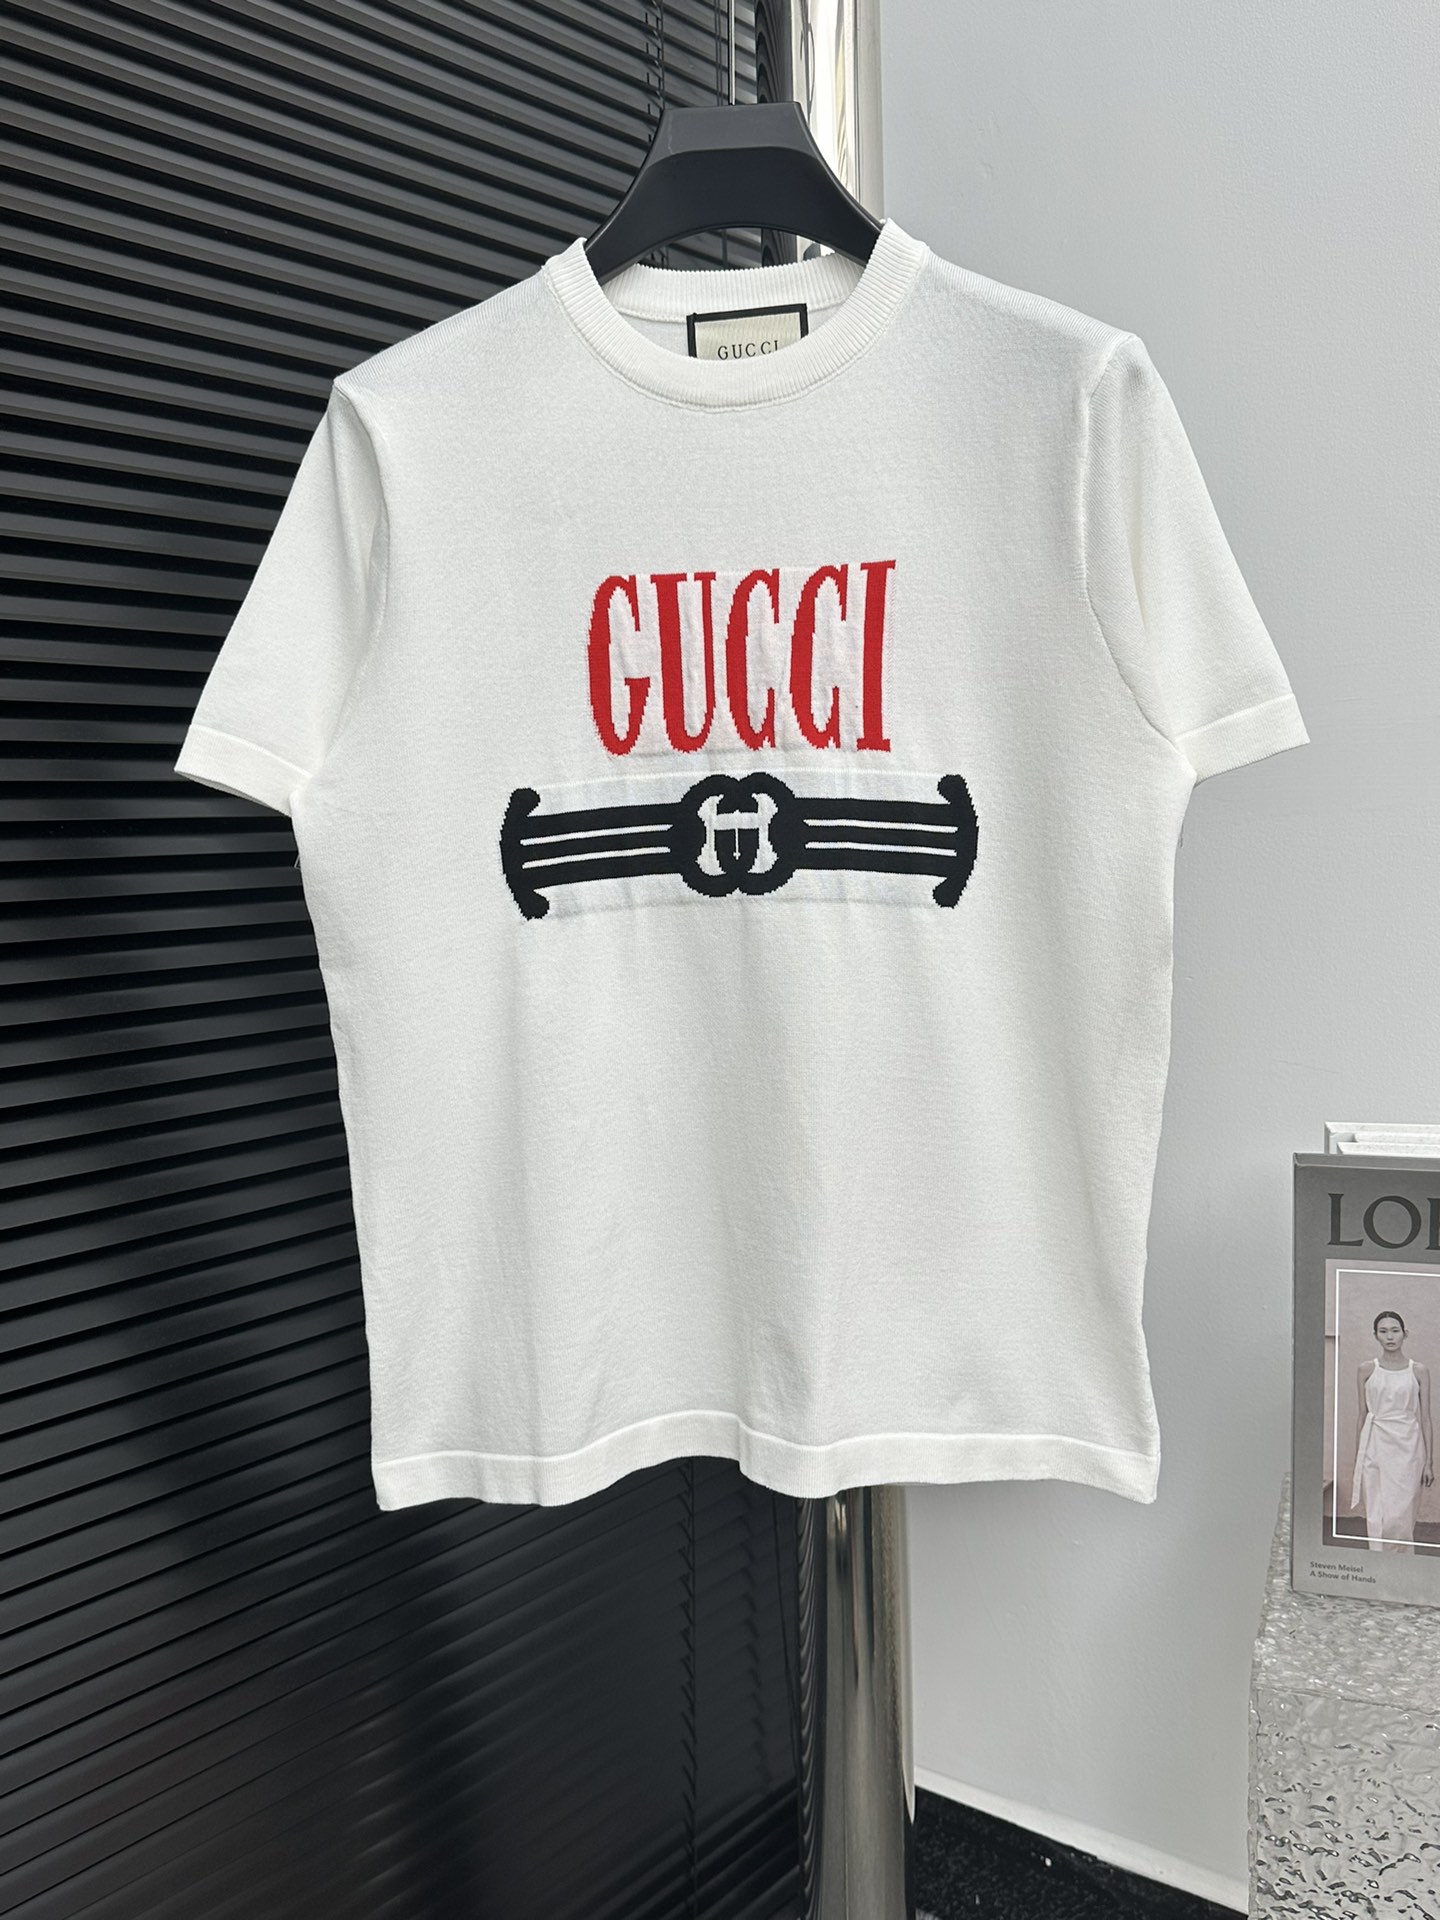 Gucci Clothing T-Shirt Knitting Spring Collection Fashion